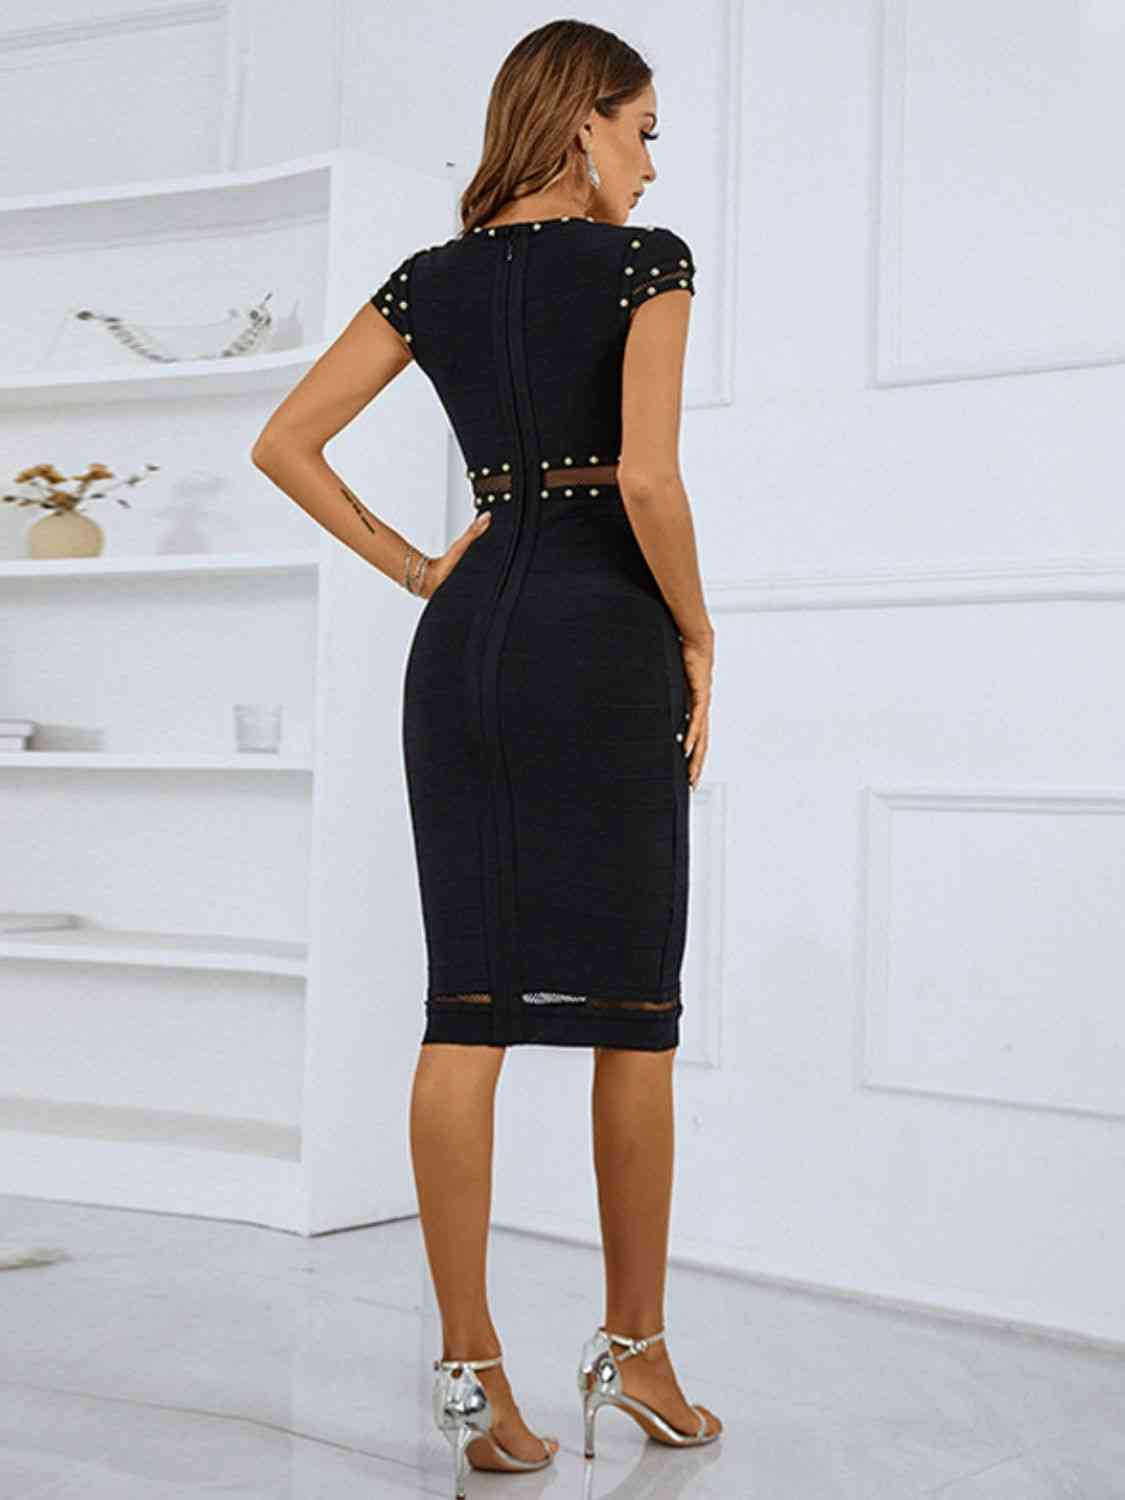 Studded Spliced Mesh V-Neck Dress | Casual Chic with a Touch of Glam